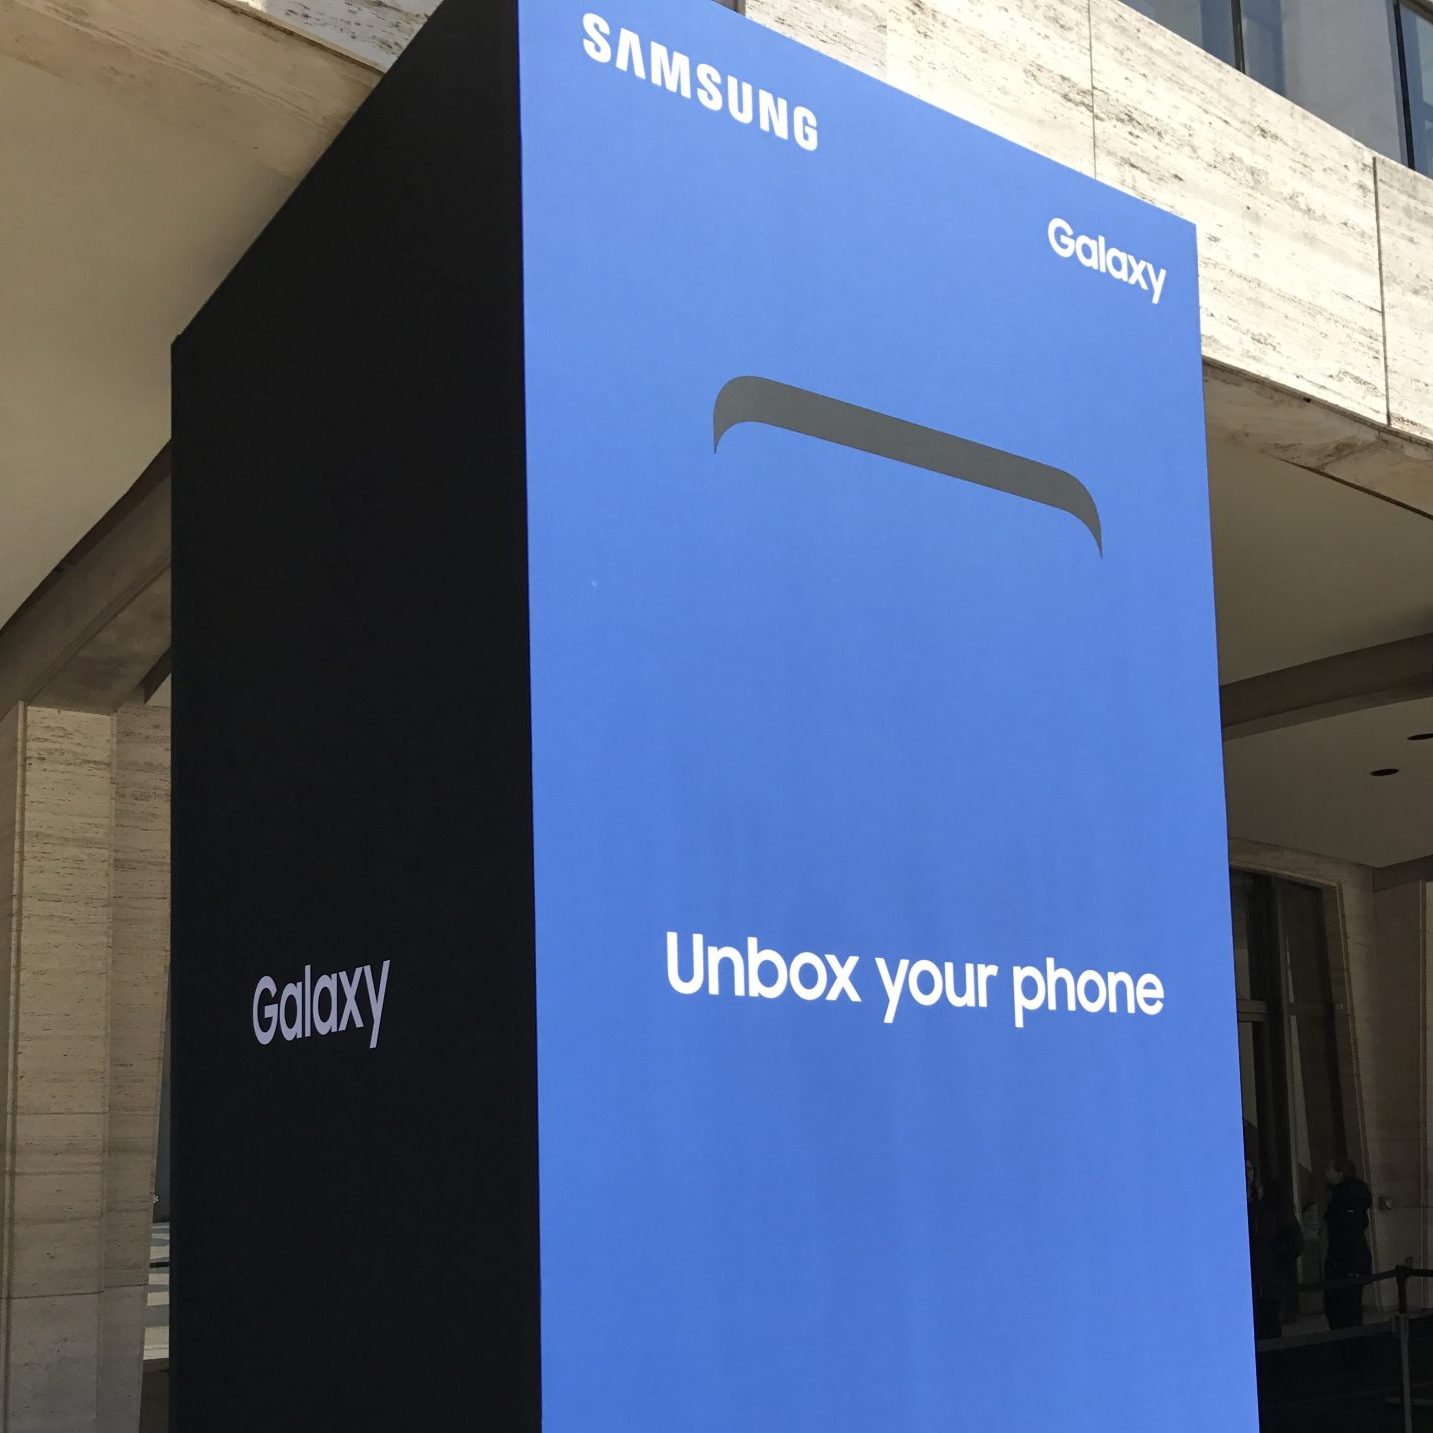 successful Product Launch Event for Samsung Galaxy